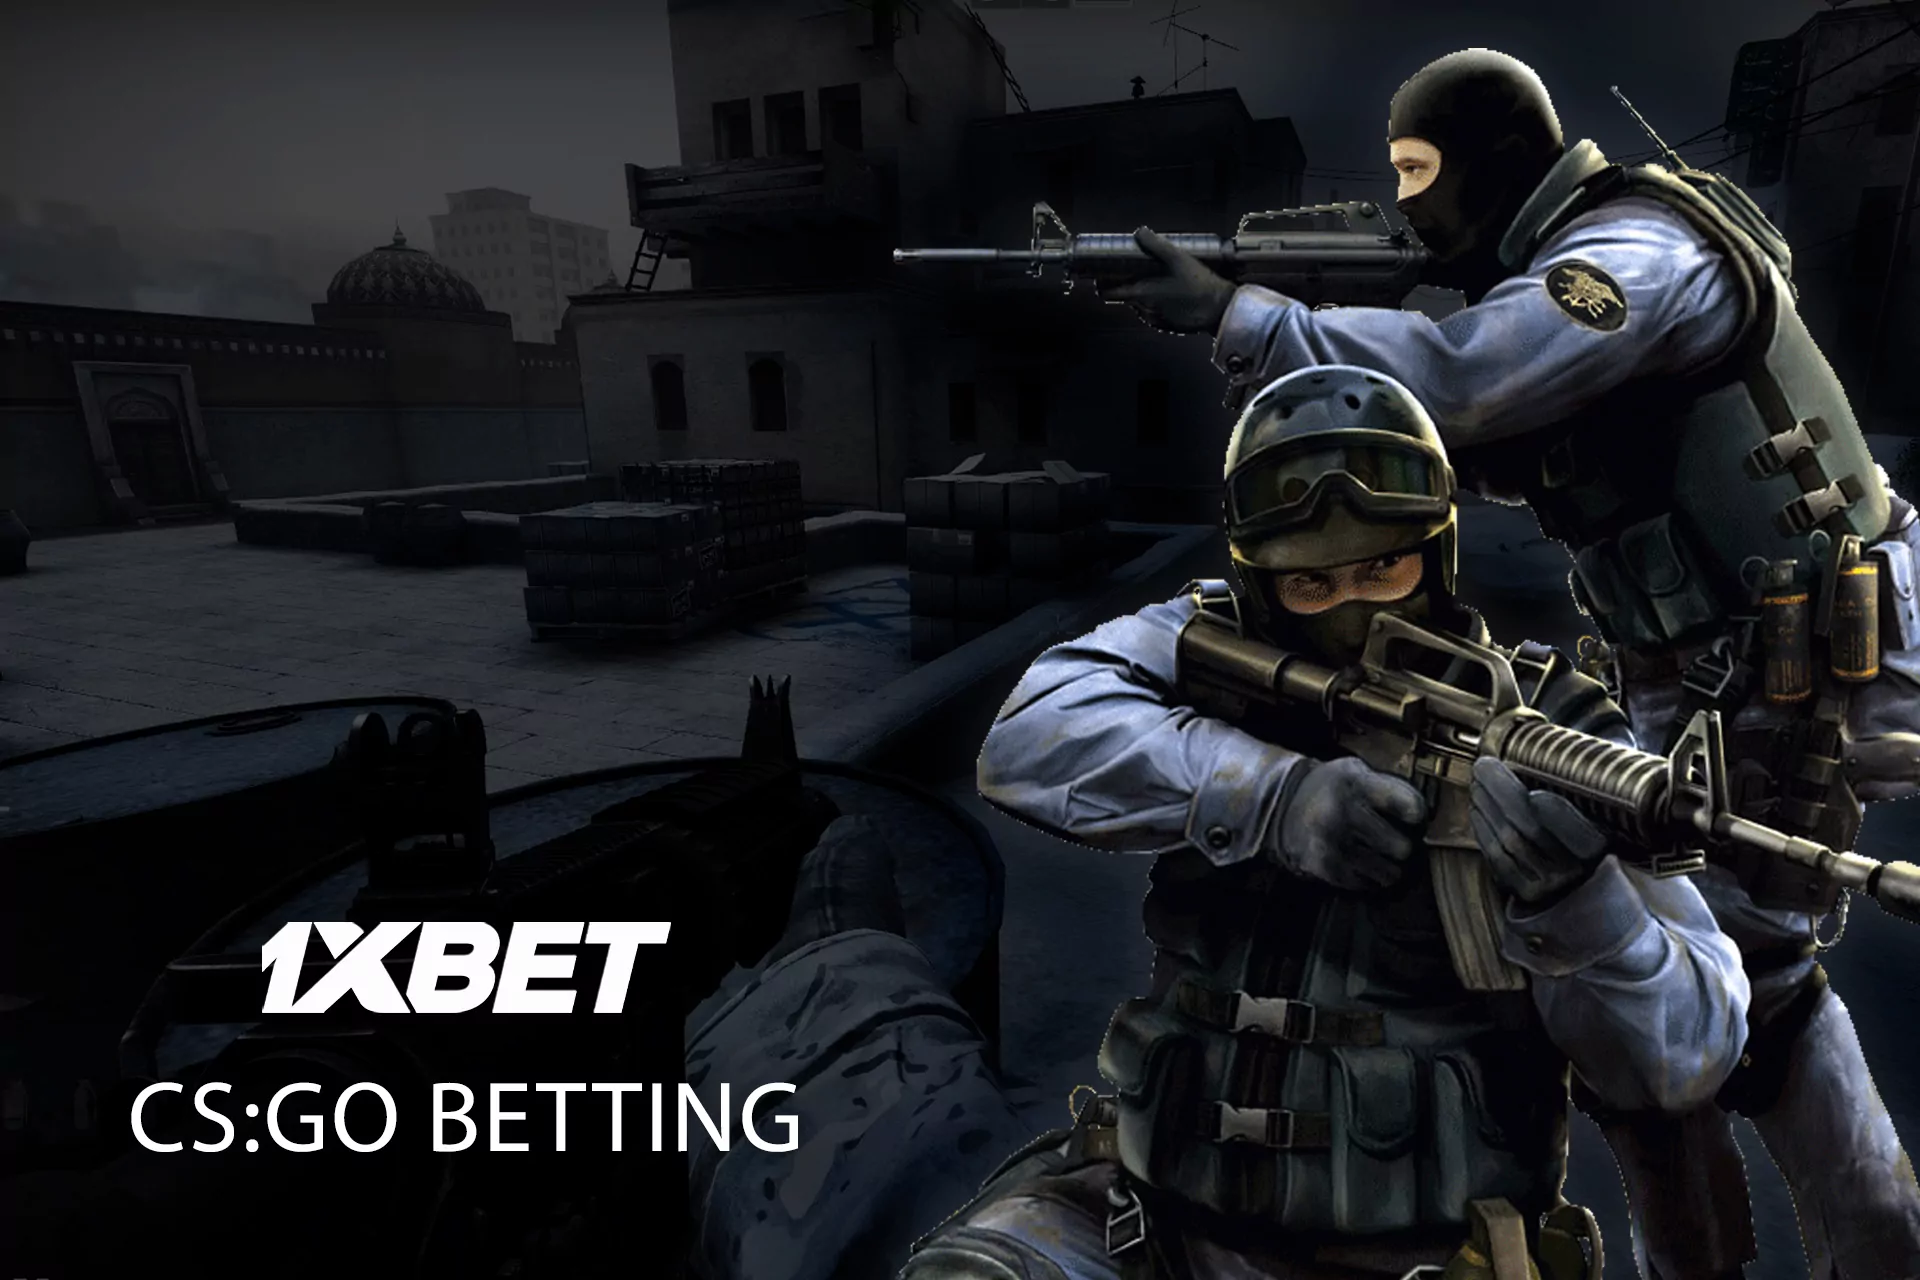 1xBet users from India can bet on popular CS:GO tournaments.